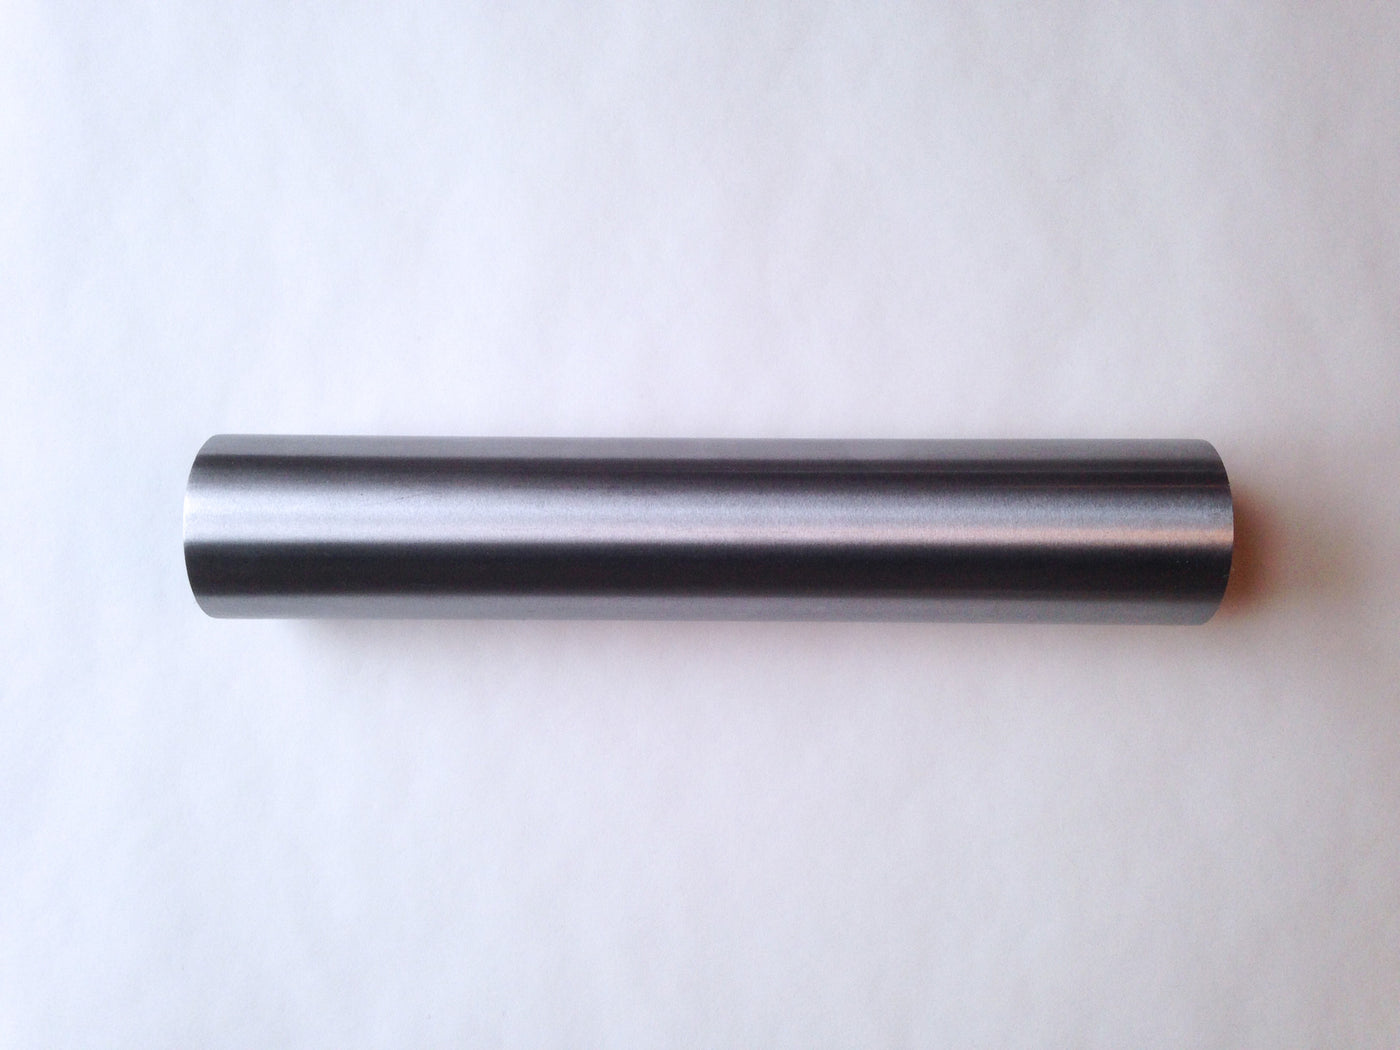 Columbus HSS headtube for steel bicycle frames - 46 dia. - 1.1mm wall - length = 240